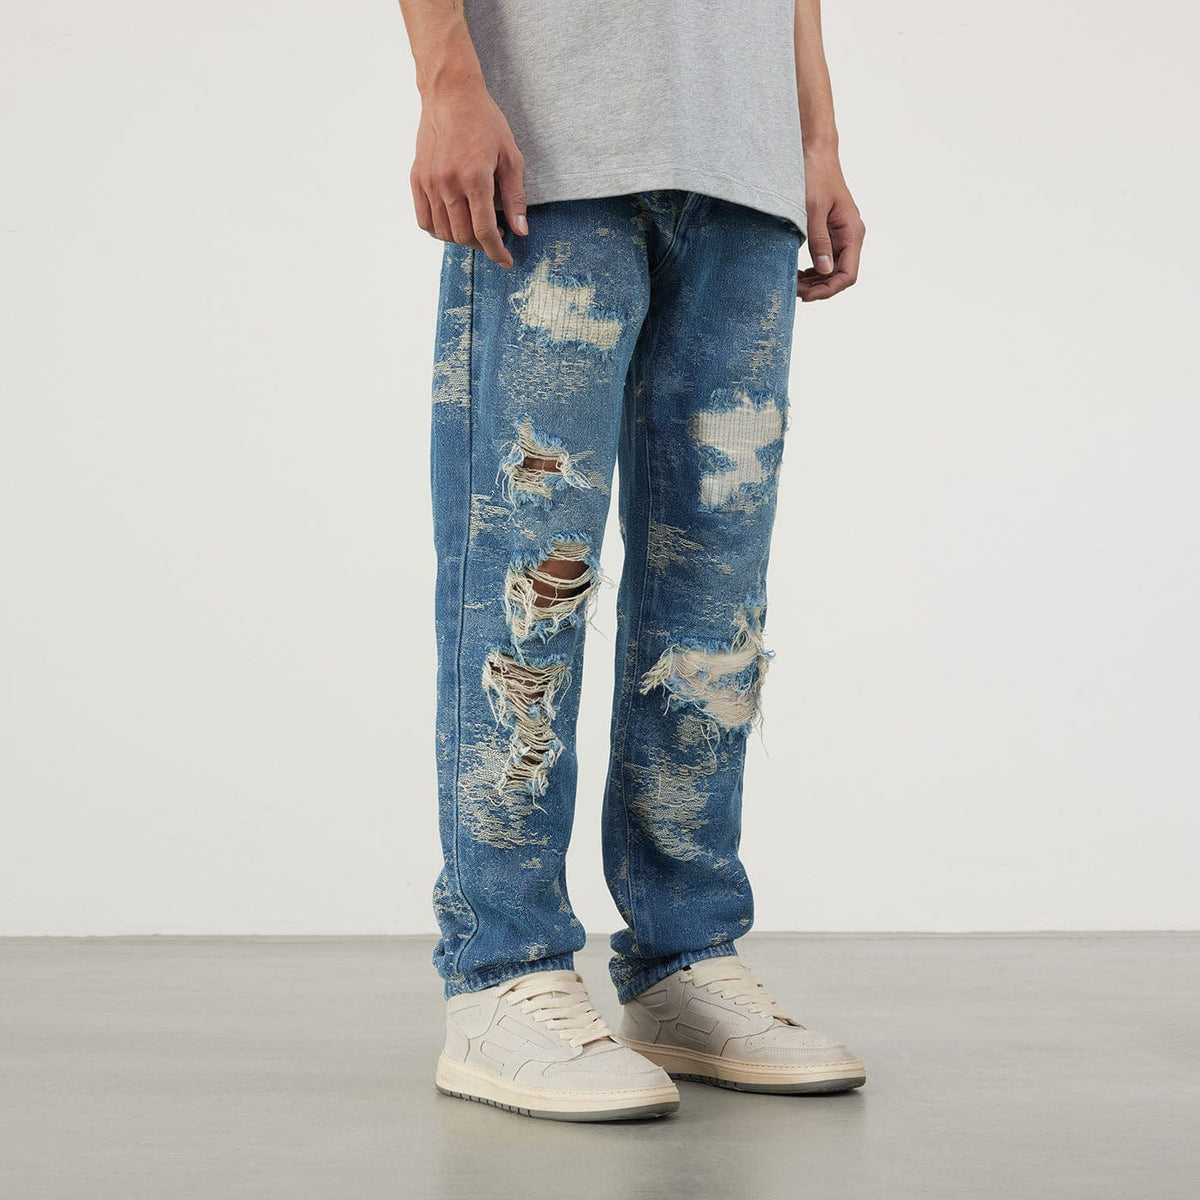 BONELESS Washed Heavily Ripped Jeans